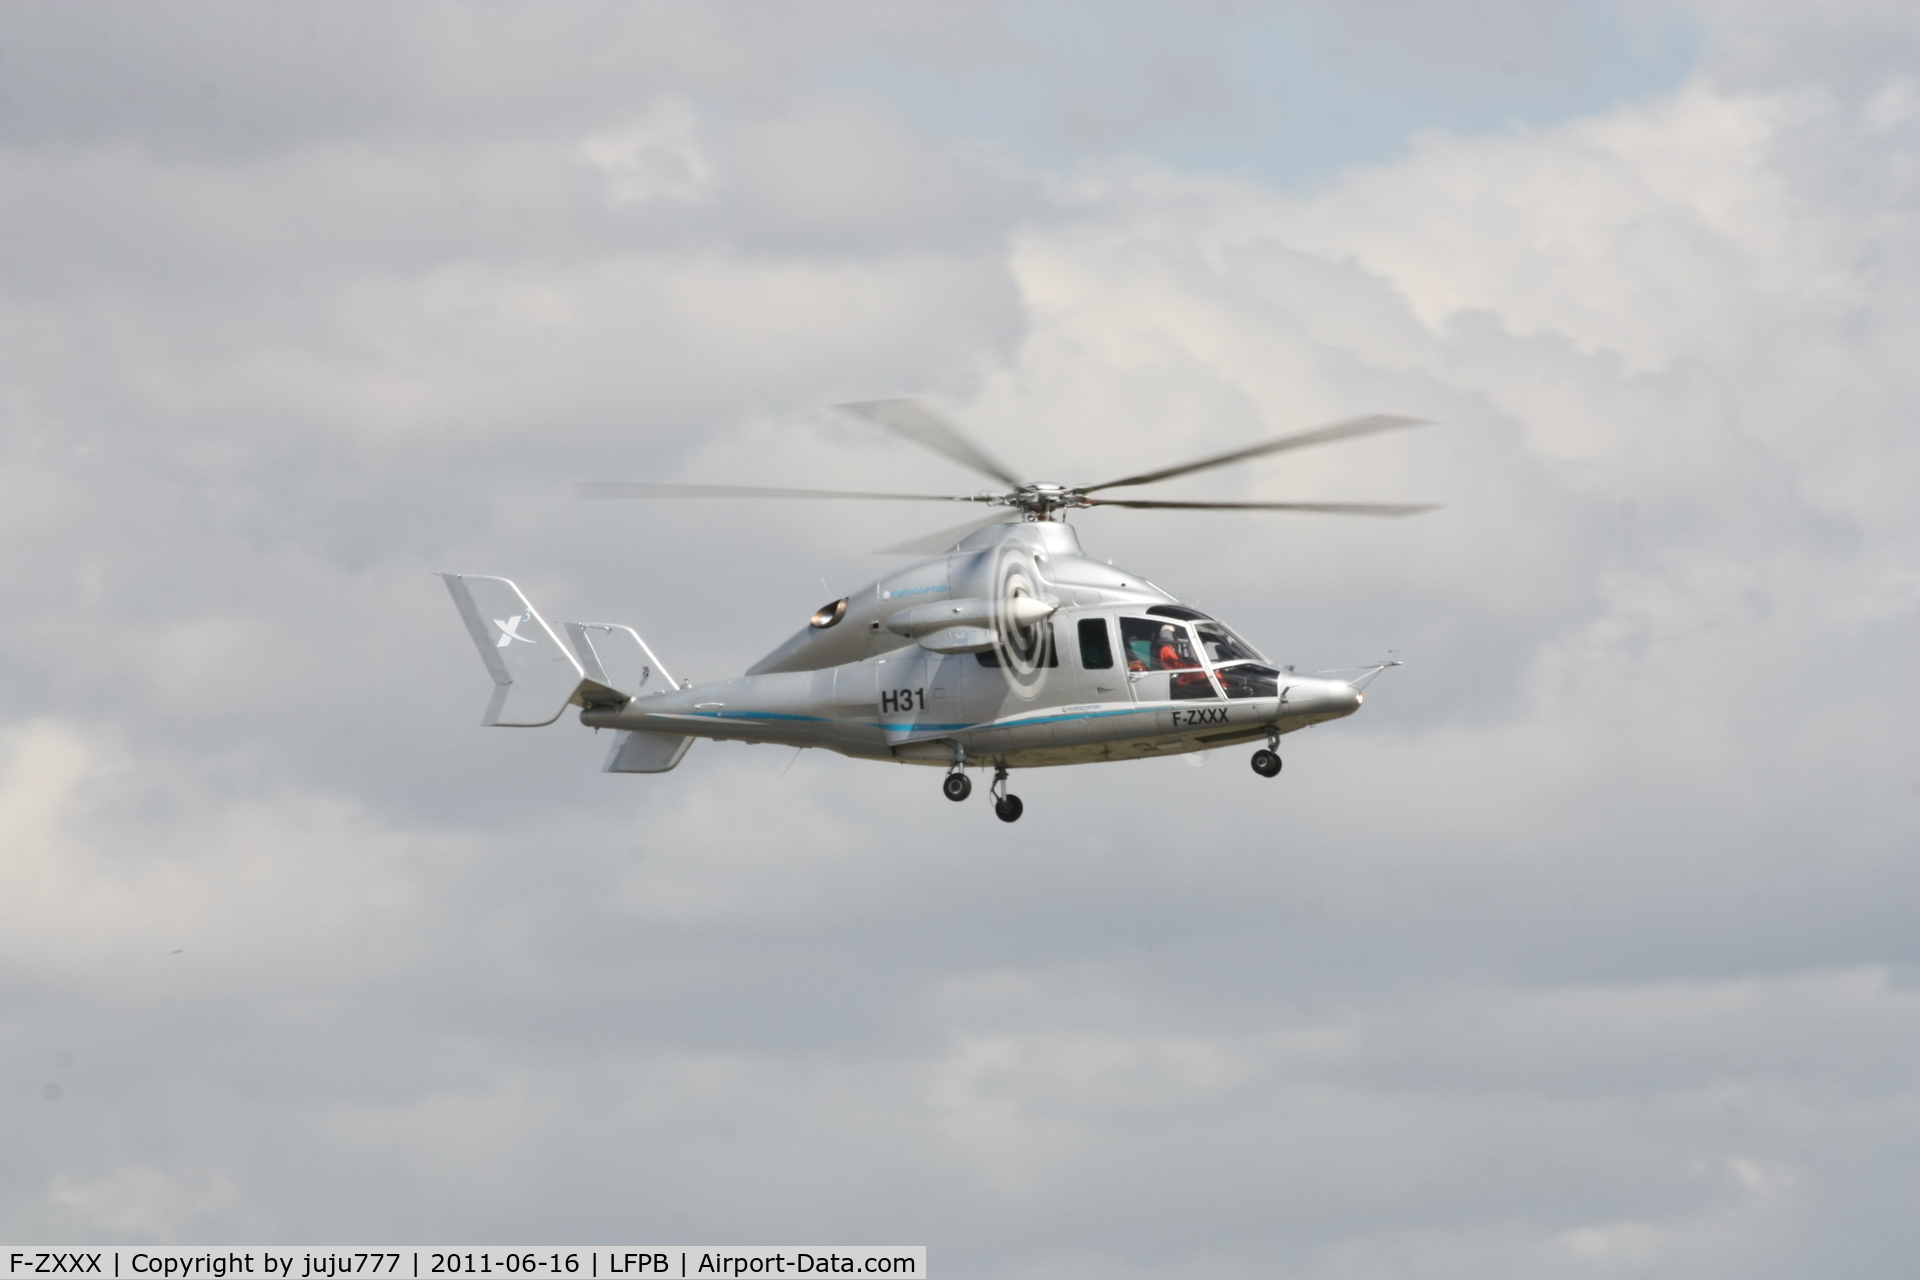 F-ZXXX, 2010 Eurocopter X3 C/N 0001, on training for SIAE 2011